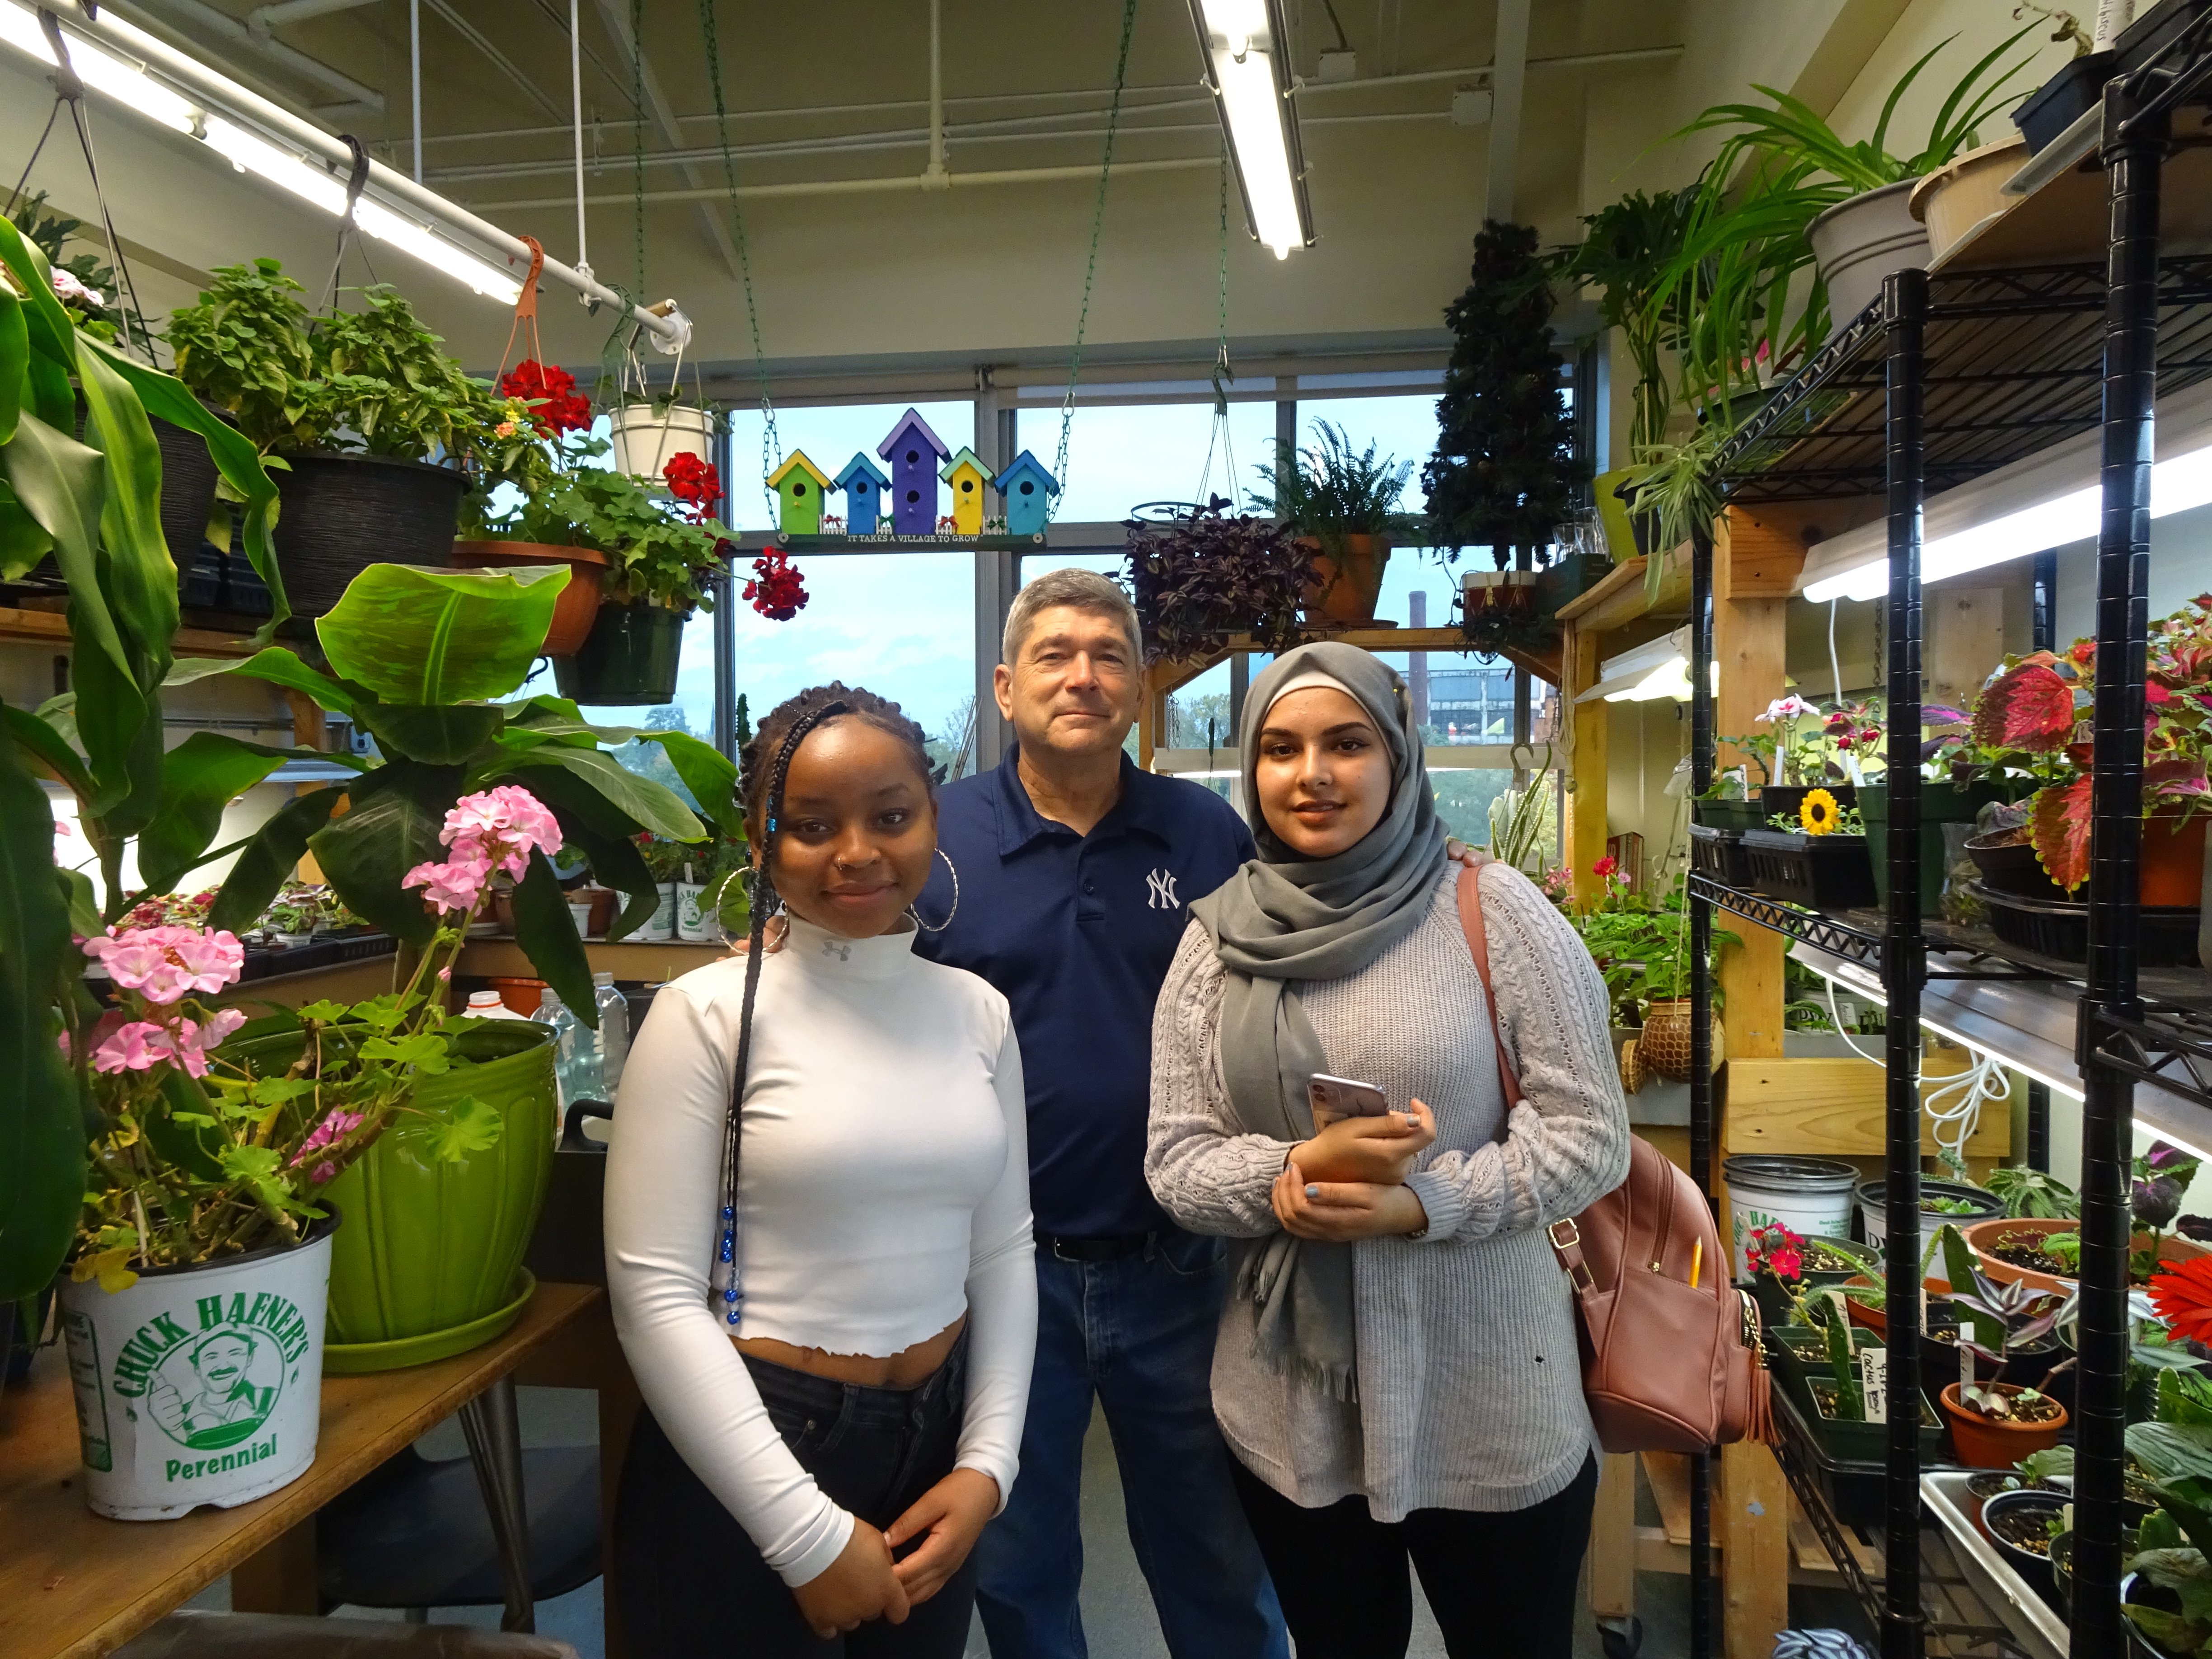 This is a photo of two students and volunteer Dave Sawyer standing in the aisle of their school's greenhouse, surrounded by plants.